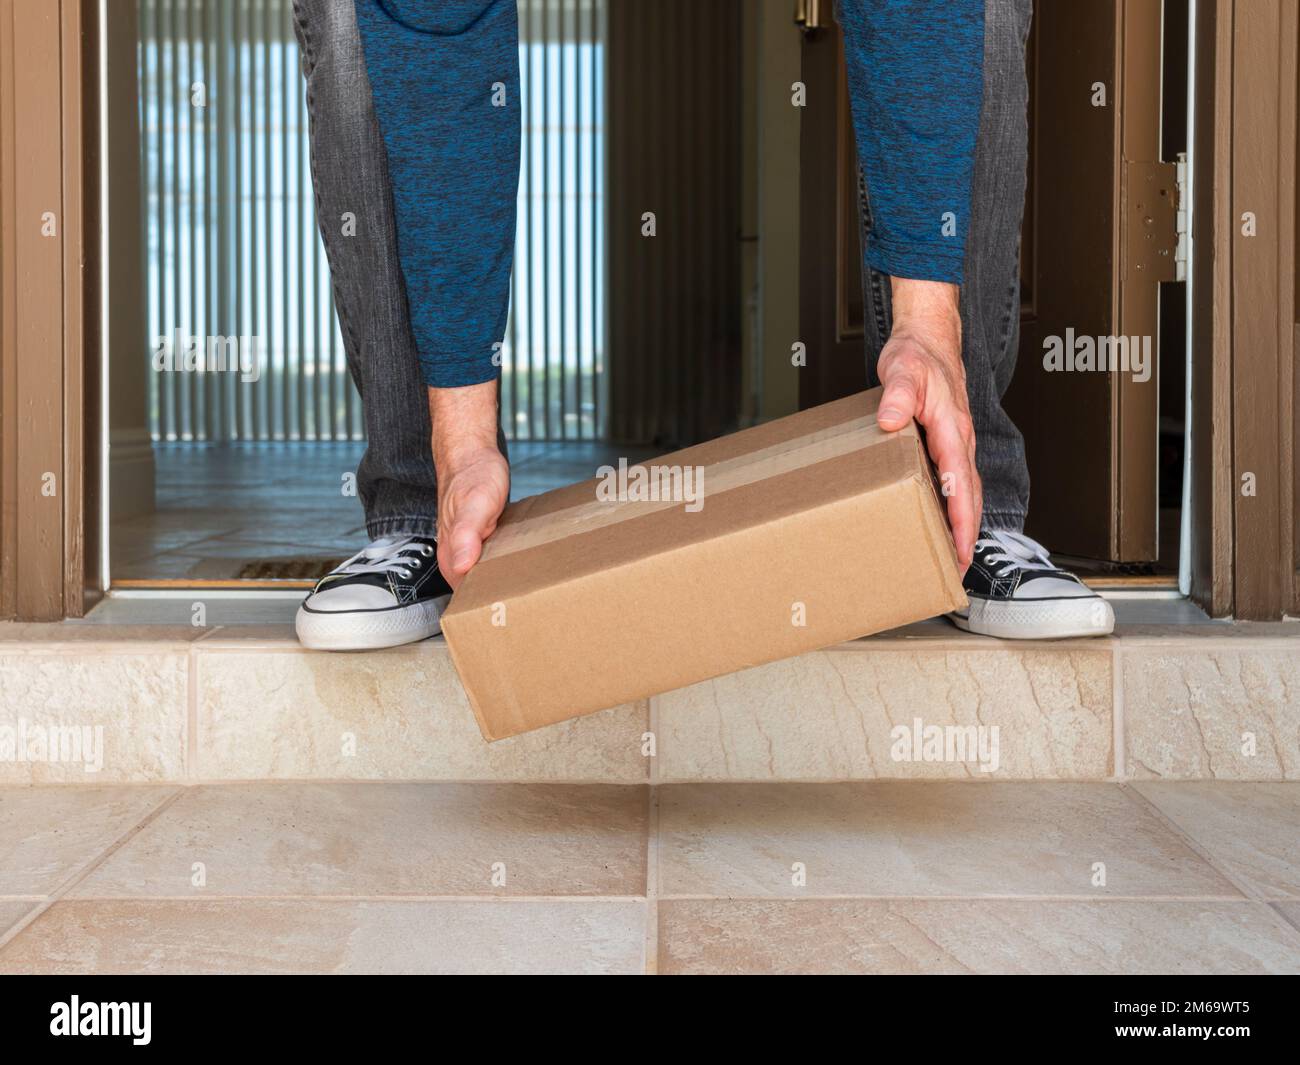 Man picking up a package box delivered to a residential doorstep. Online order package delivery to the front porch of home. Stock Photo